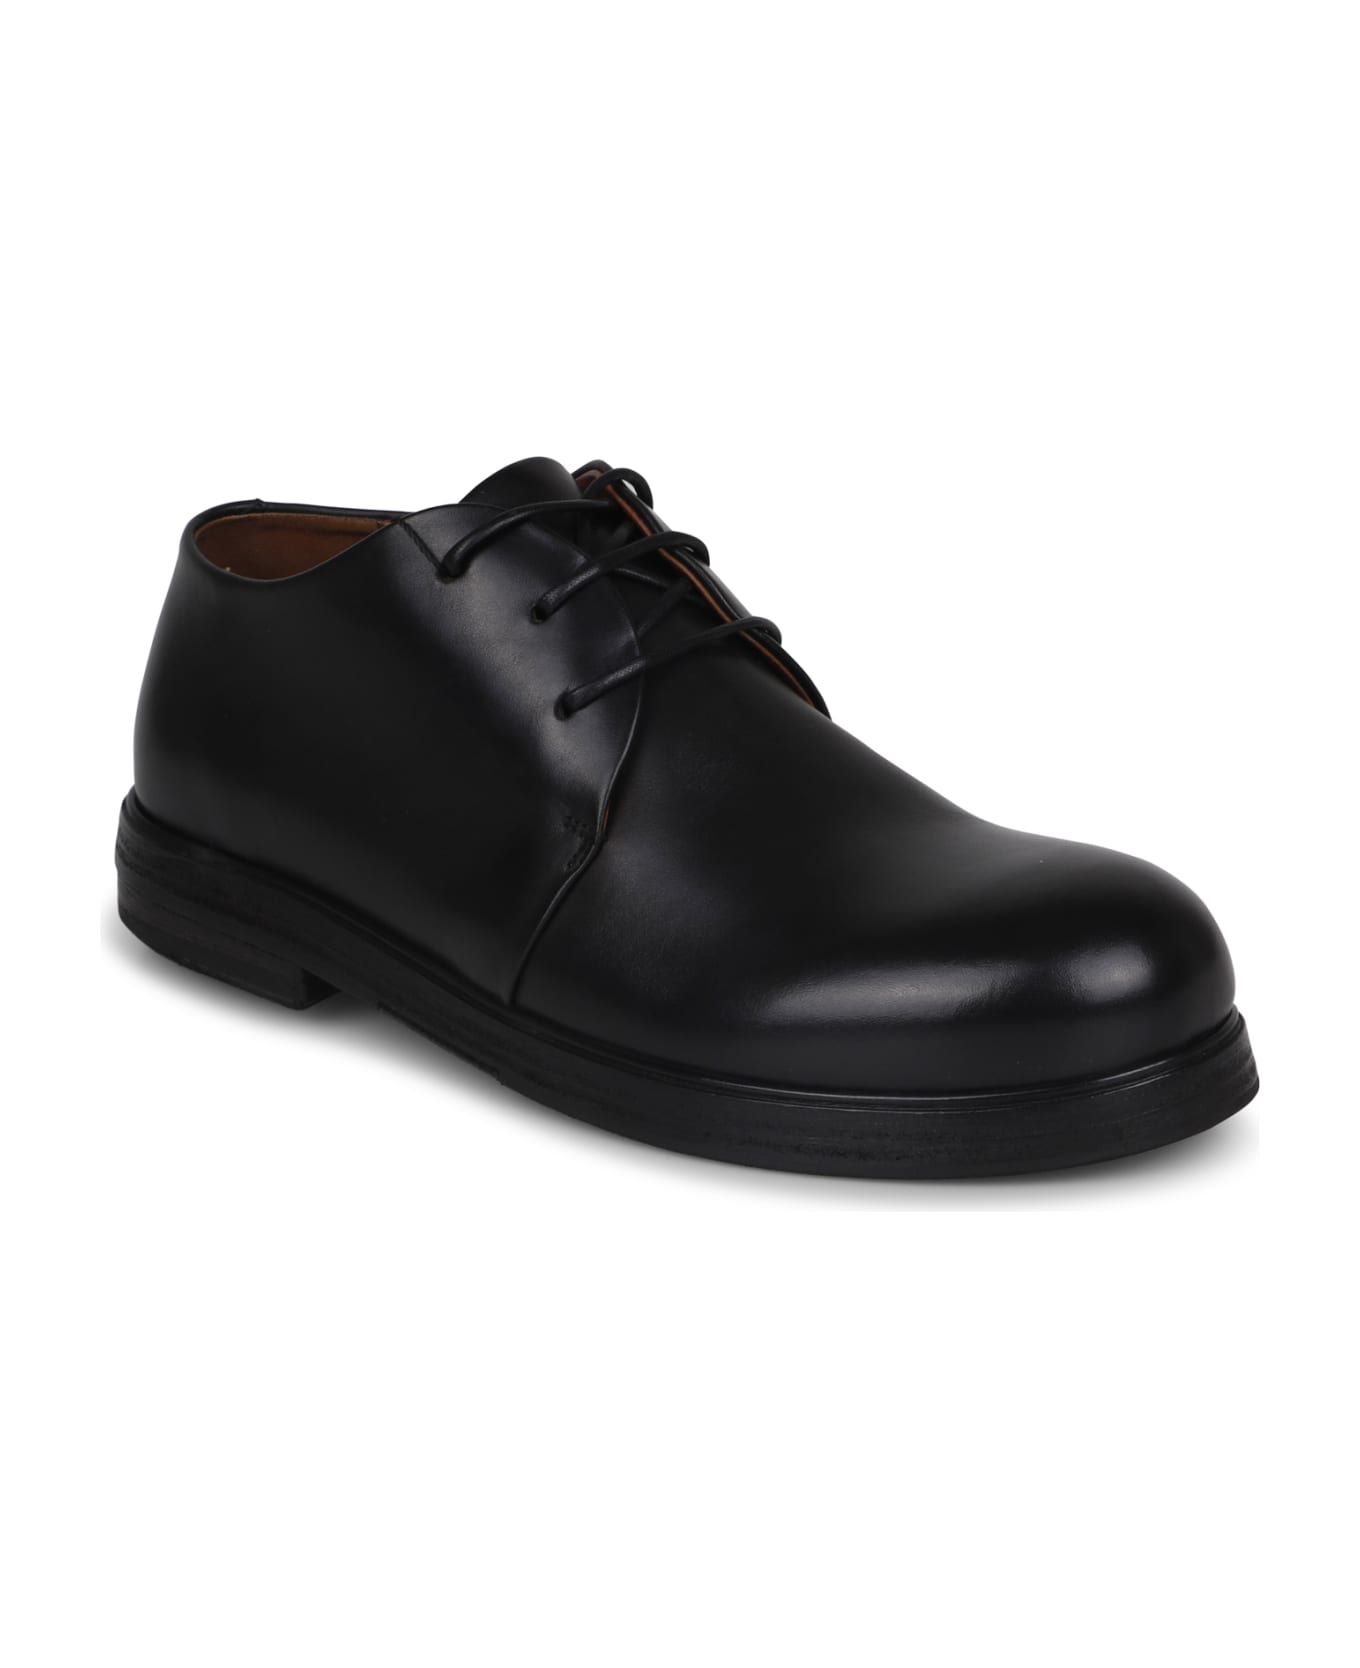 Marsell Zucca Leather Oxford Shoes